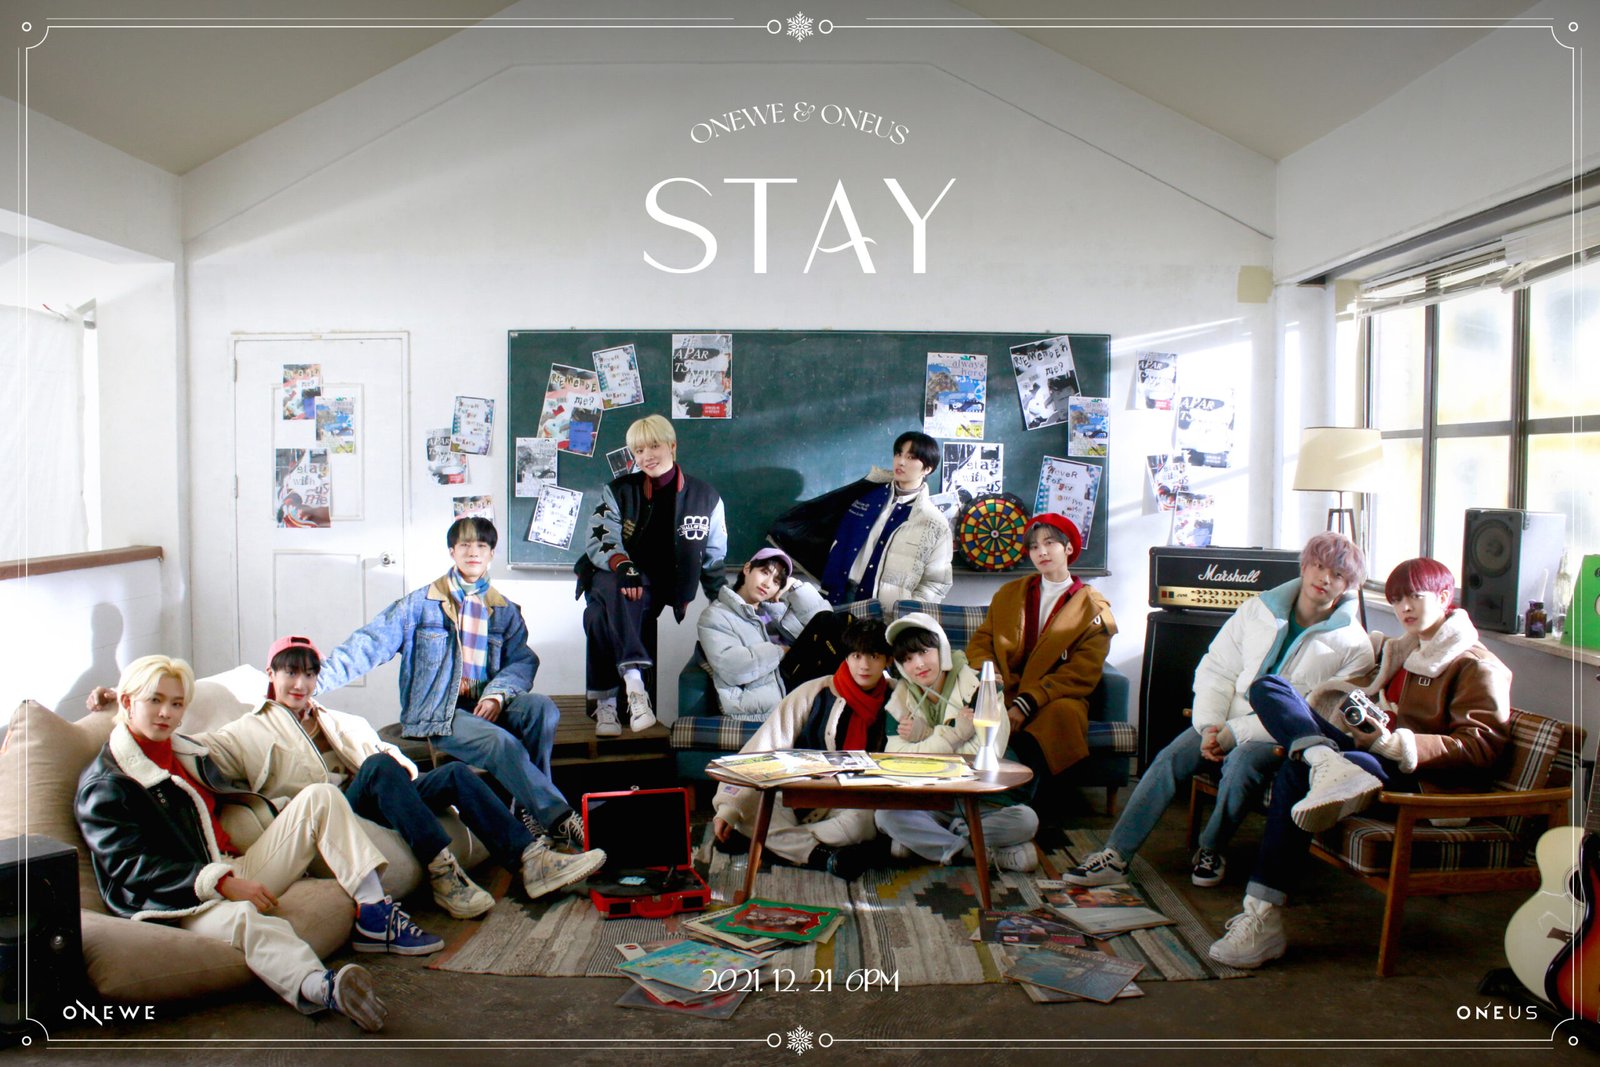 ONEUS and ONEWE team up for 'STAY' - TheKMeal